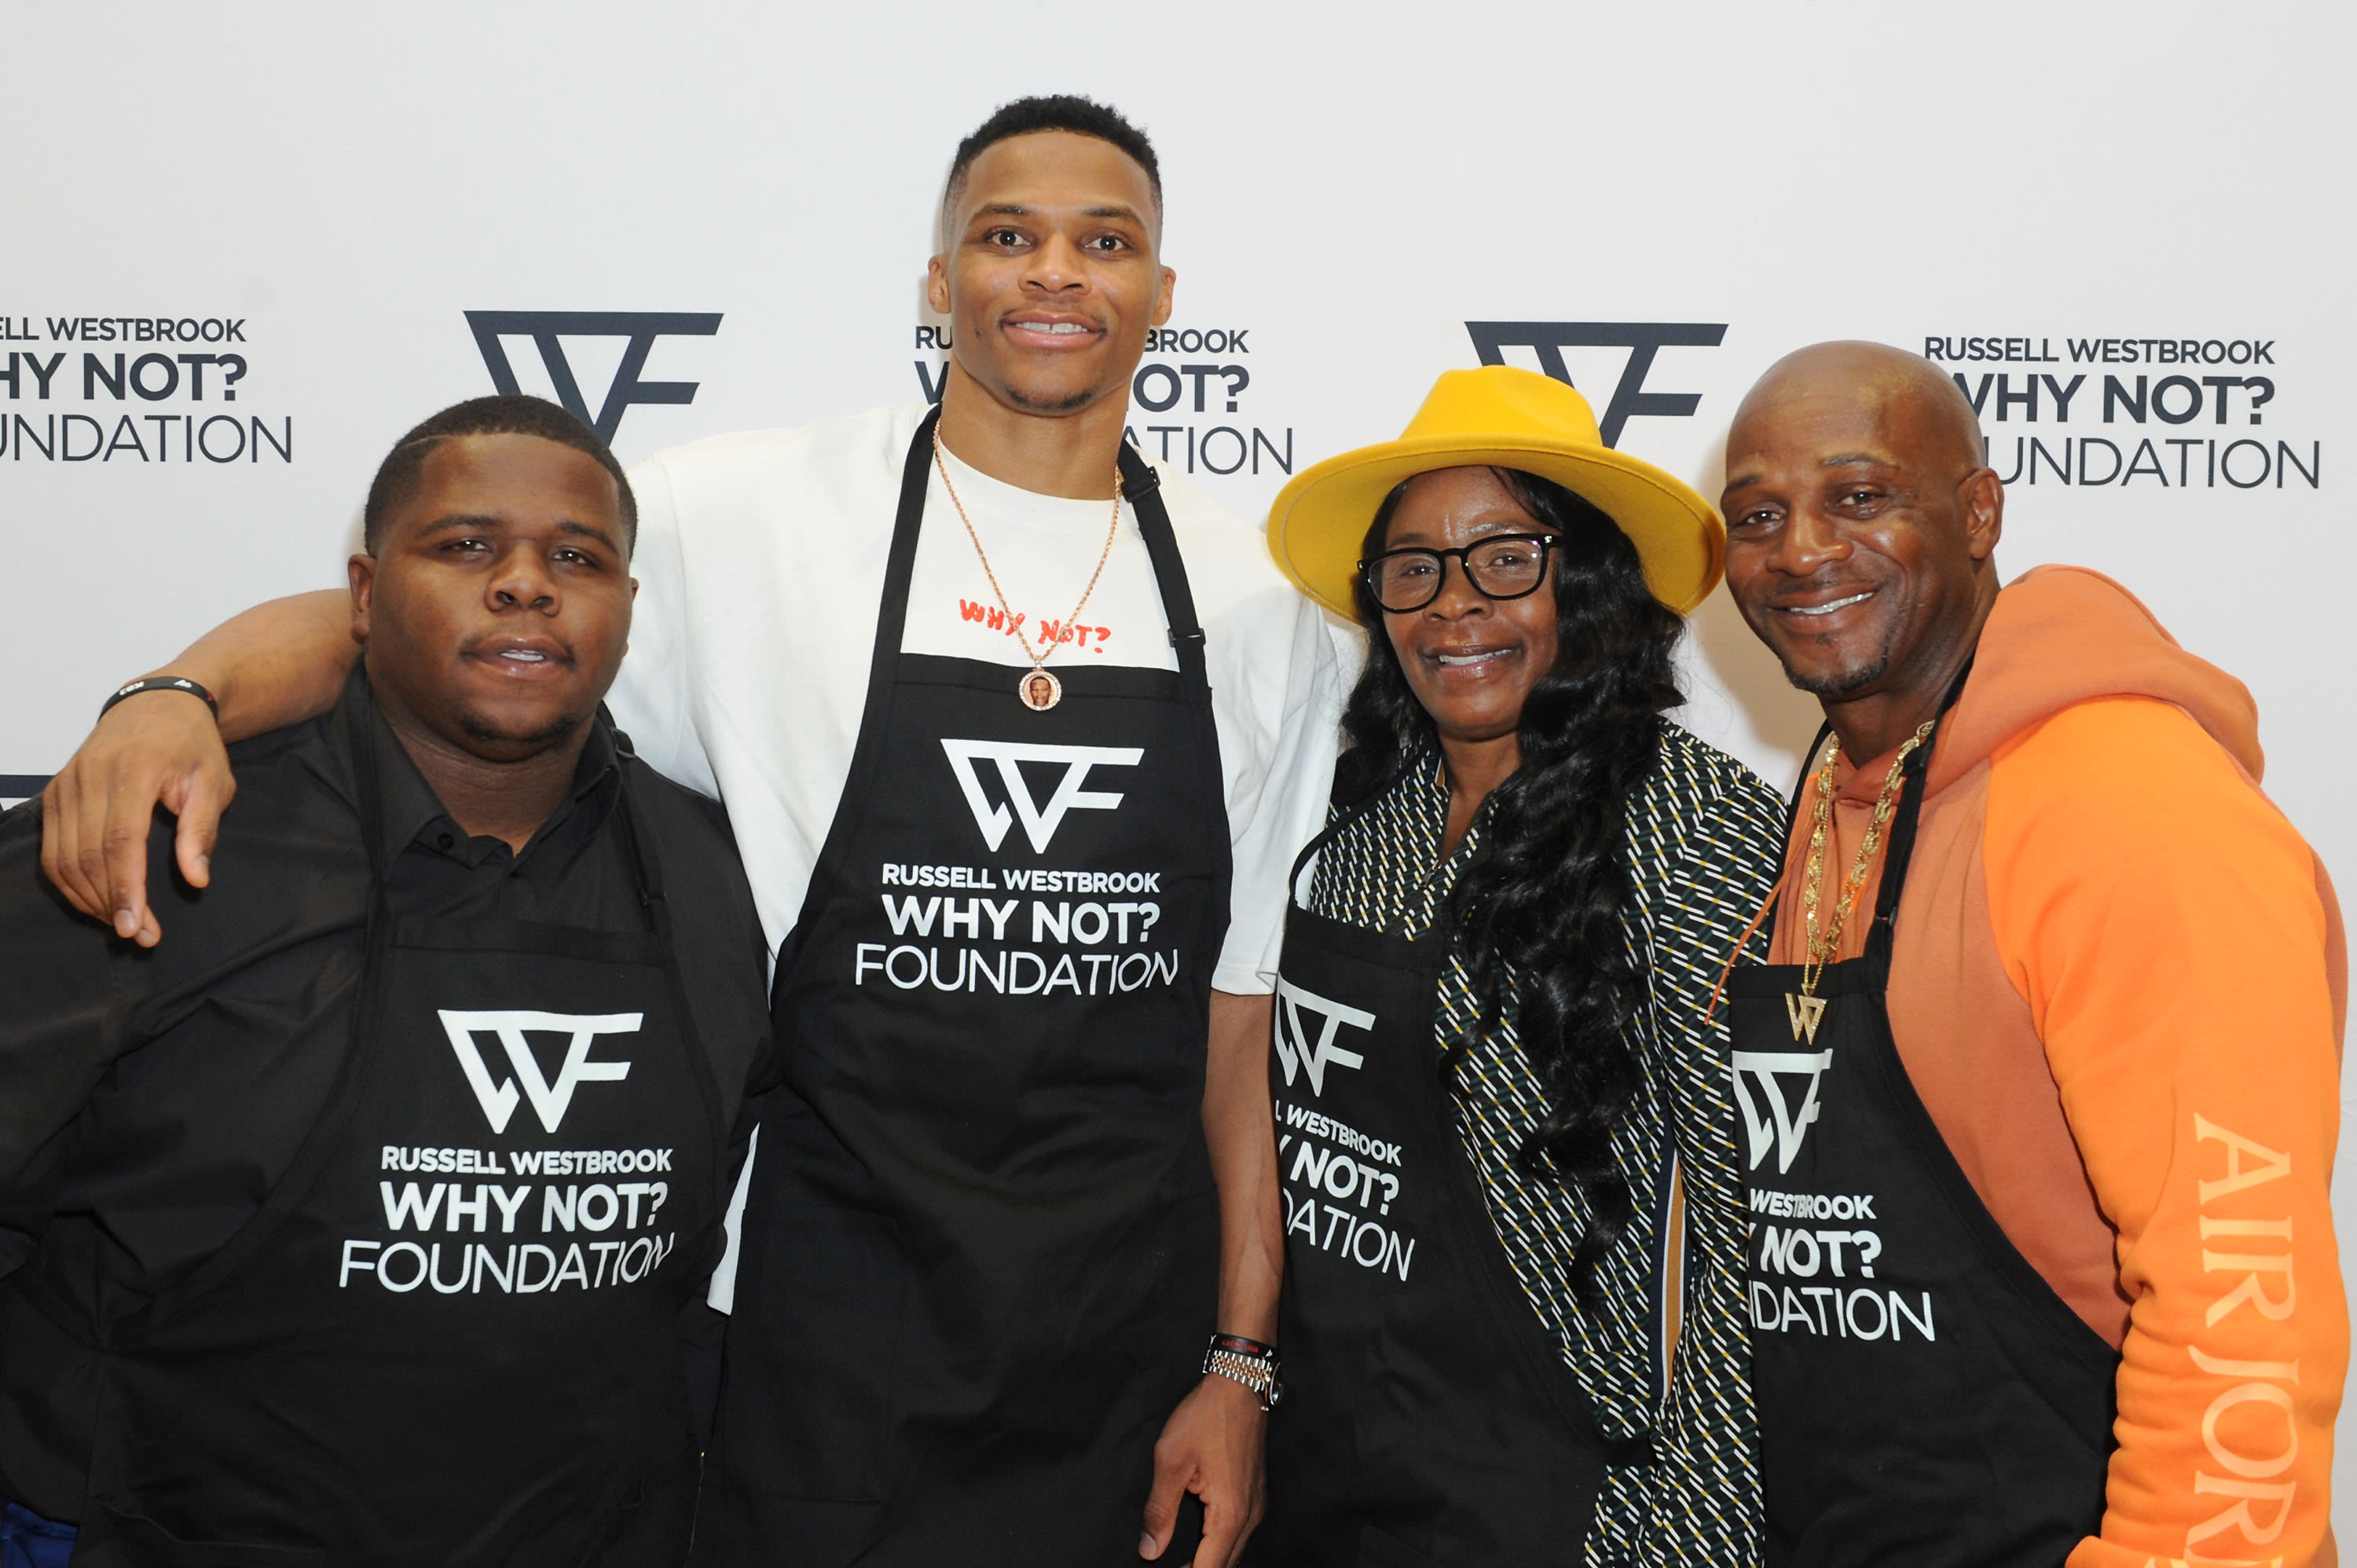 The Russell Westbrook Why Not? Foundation